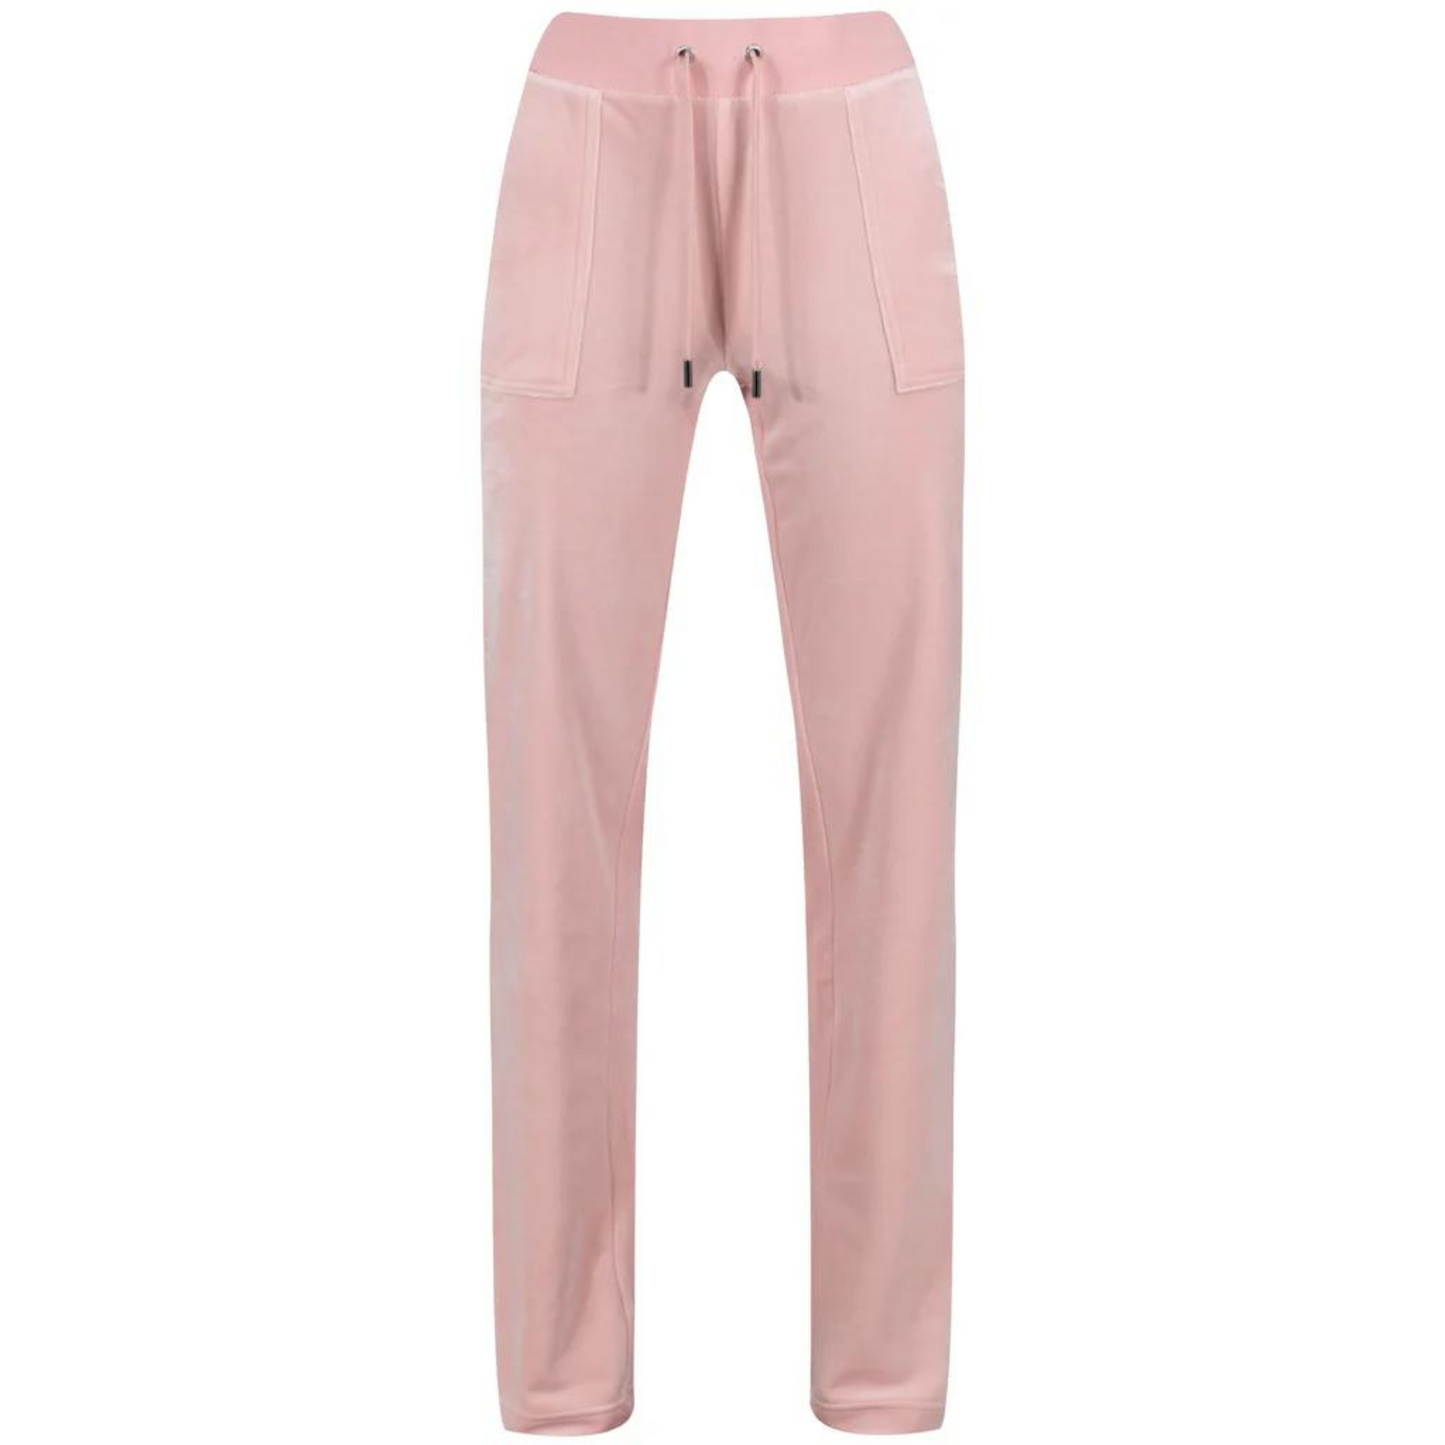 DEL RAY CLASSIC VELOUR PANT POCKET DESIGN PALE PINK